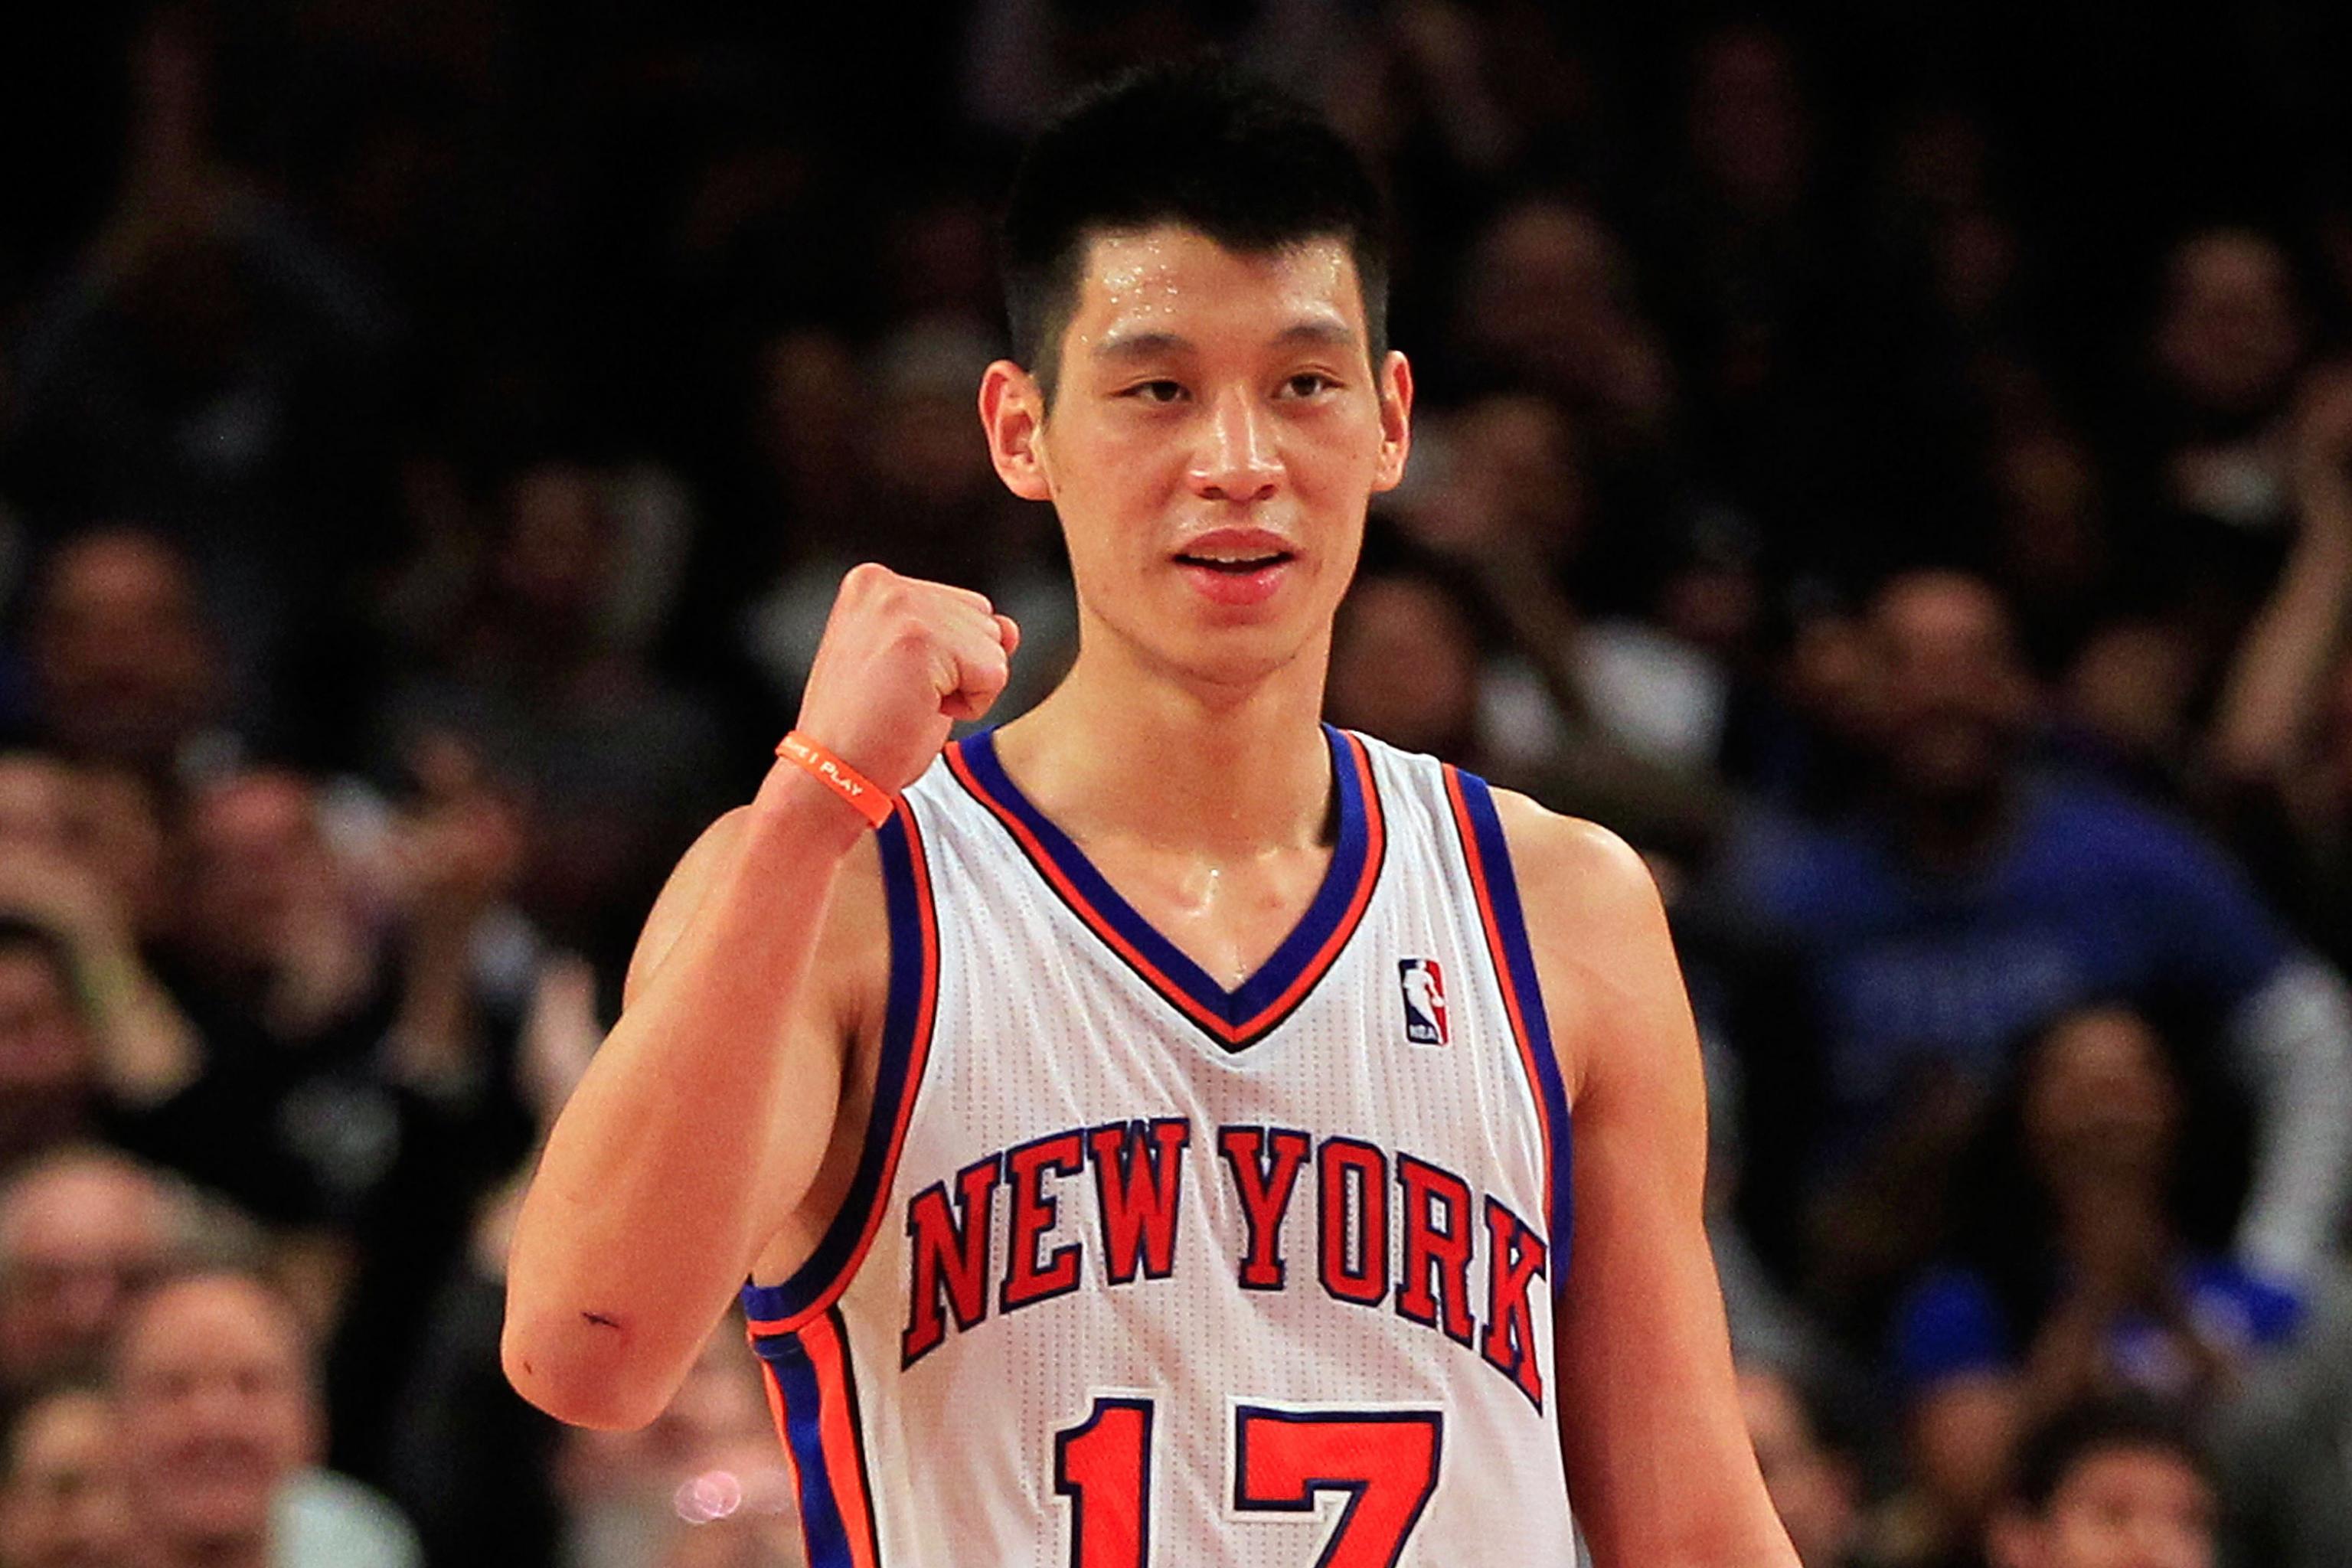 Linsanity' revisited - A look at Jeremy Lin's brief time as a basketball  phenomenon 